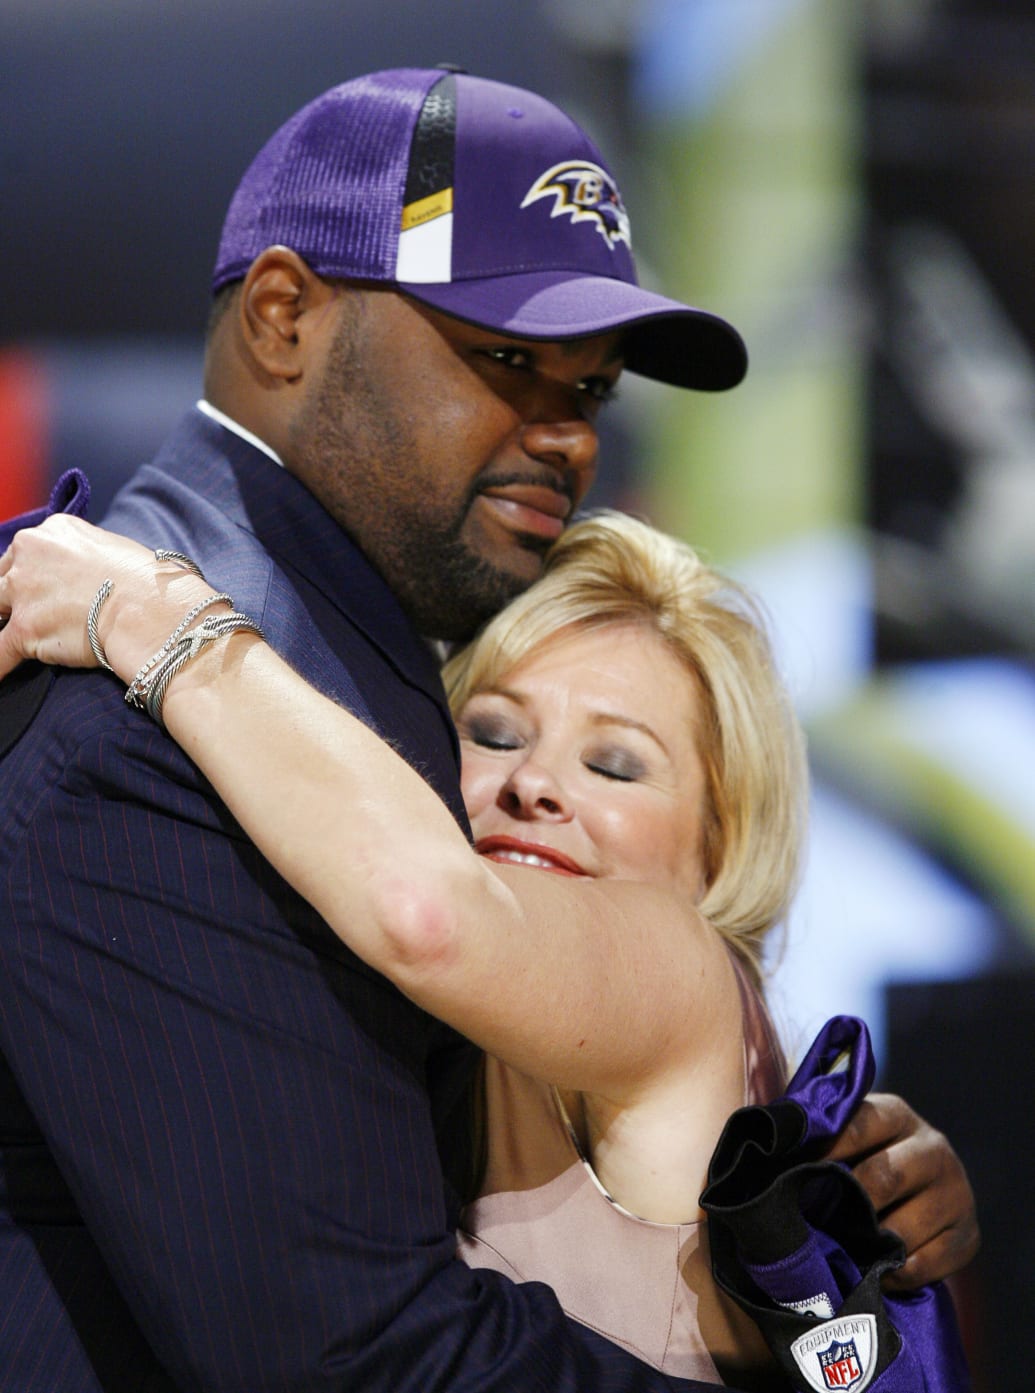 Michael Oher embraces Leigh Anne Tuohy as he wears a suit and Baltimore Ravens cap after being drafted in 2009.